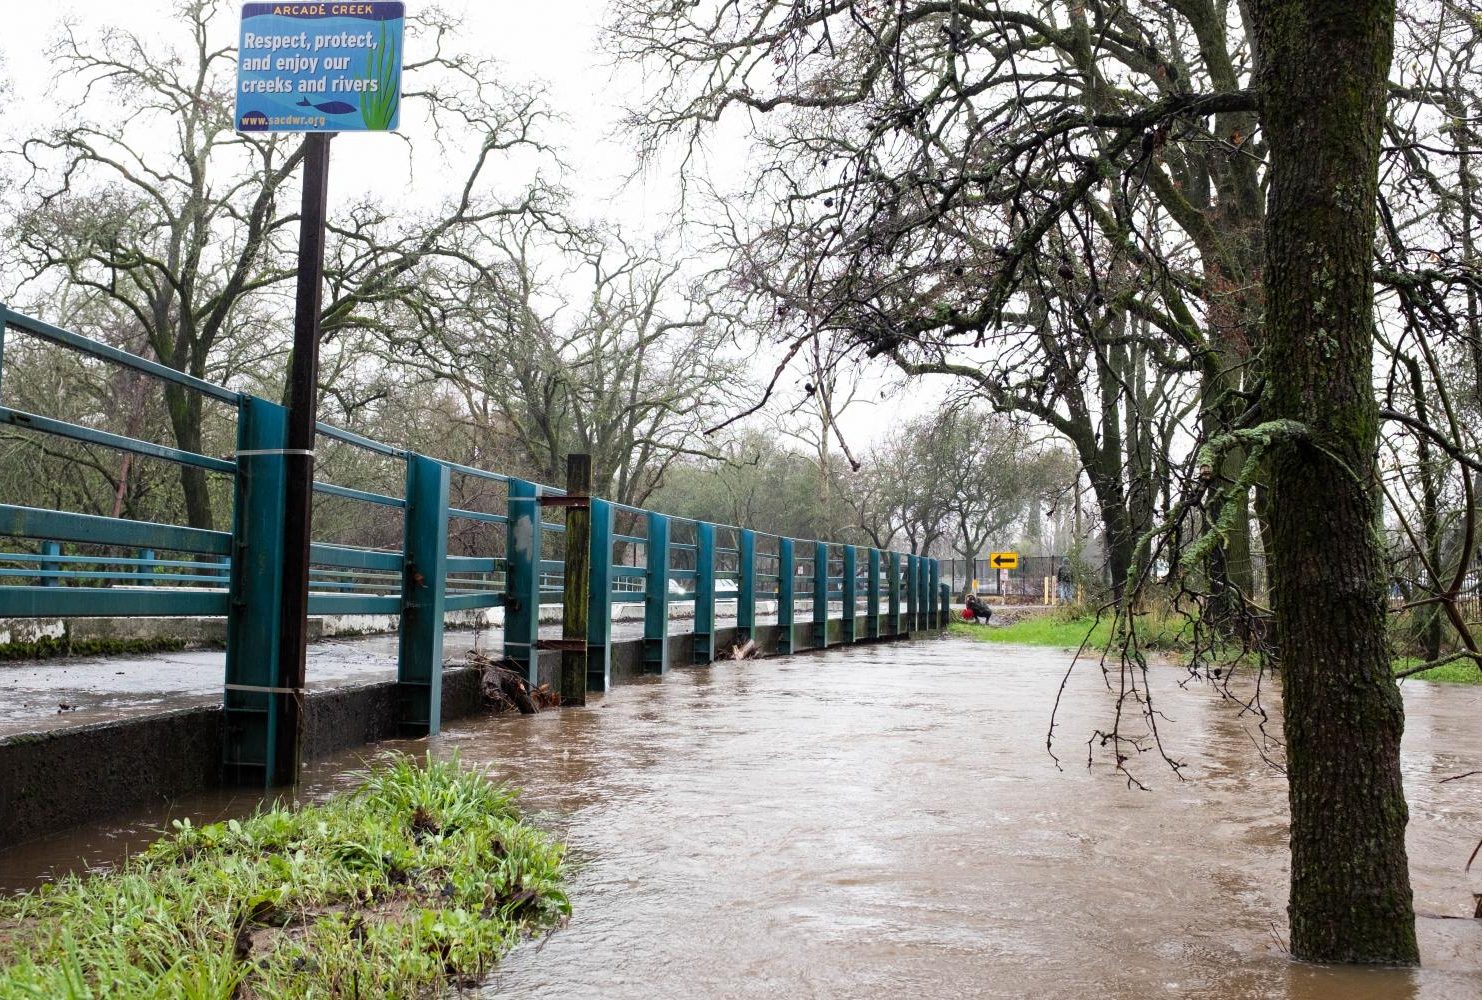 Heavy rains in Sacramento caused the water level of Arcade Creek to rise nearly up to the bridge line at American River College on Feb. 26, 2019. (Photo by Patrick Hyun Wilson)